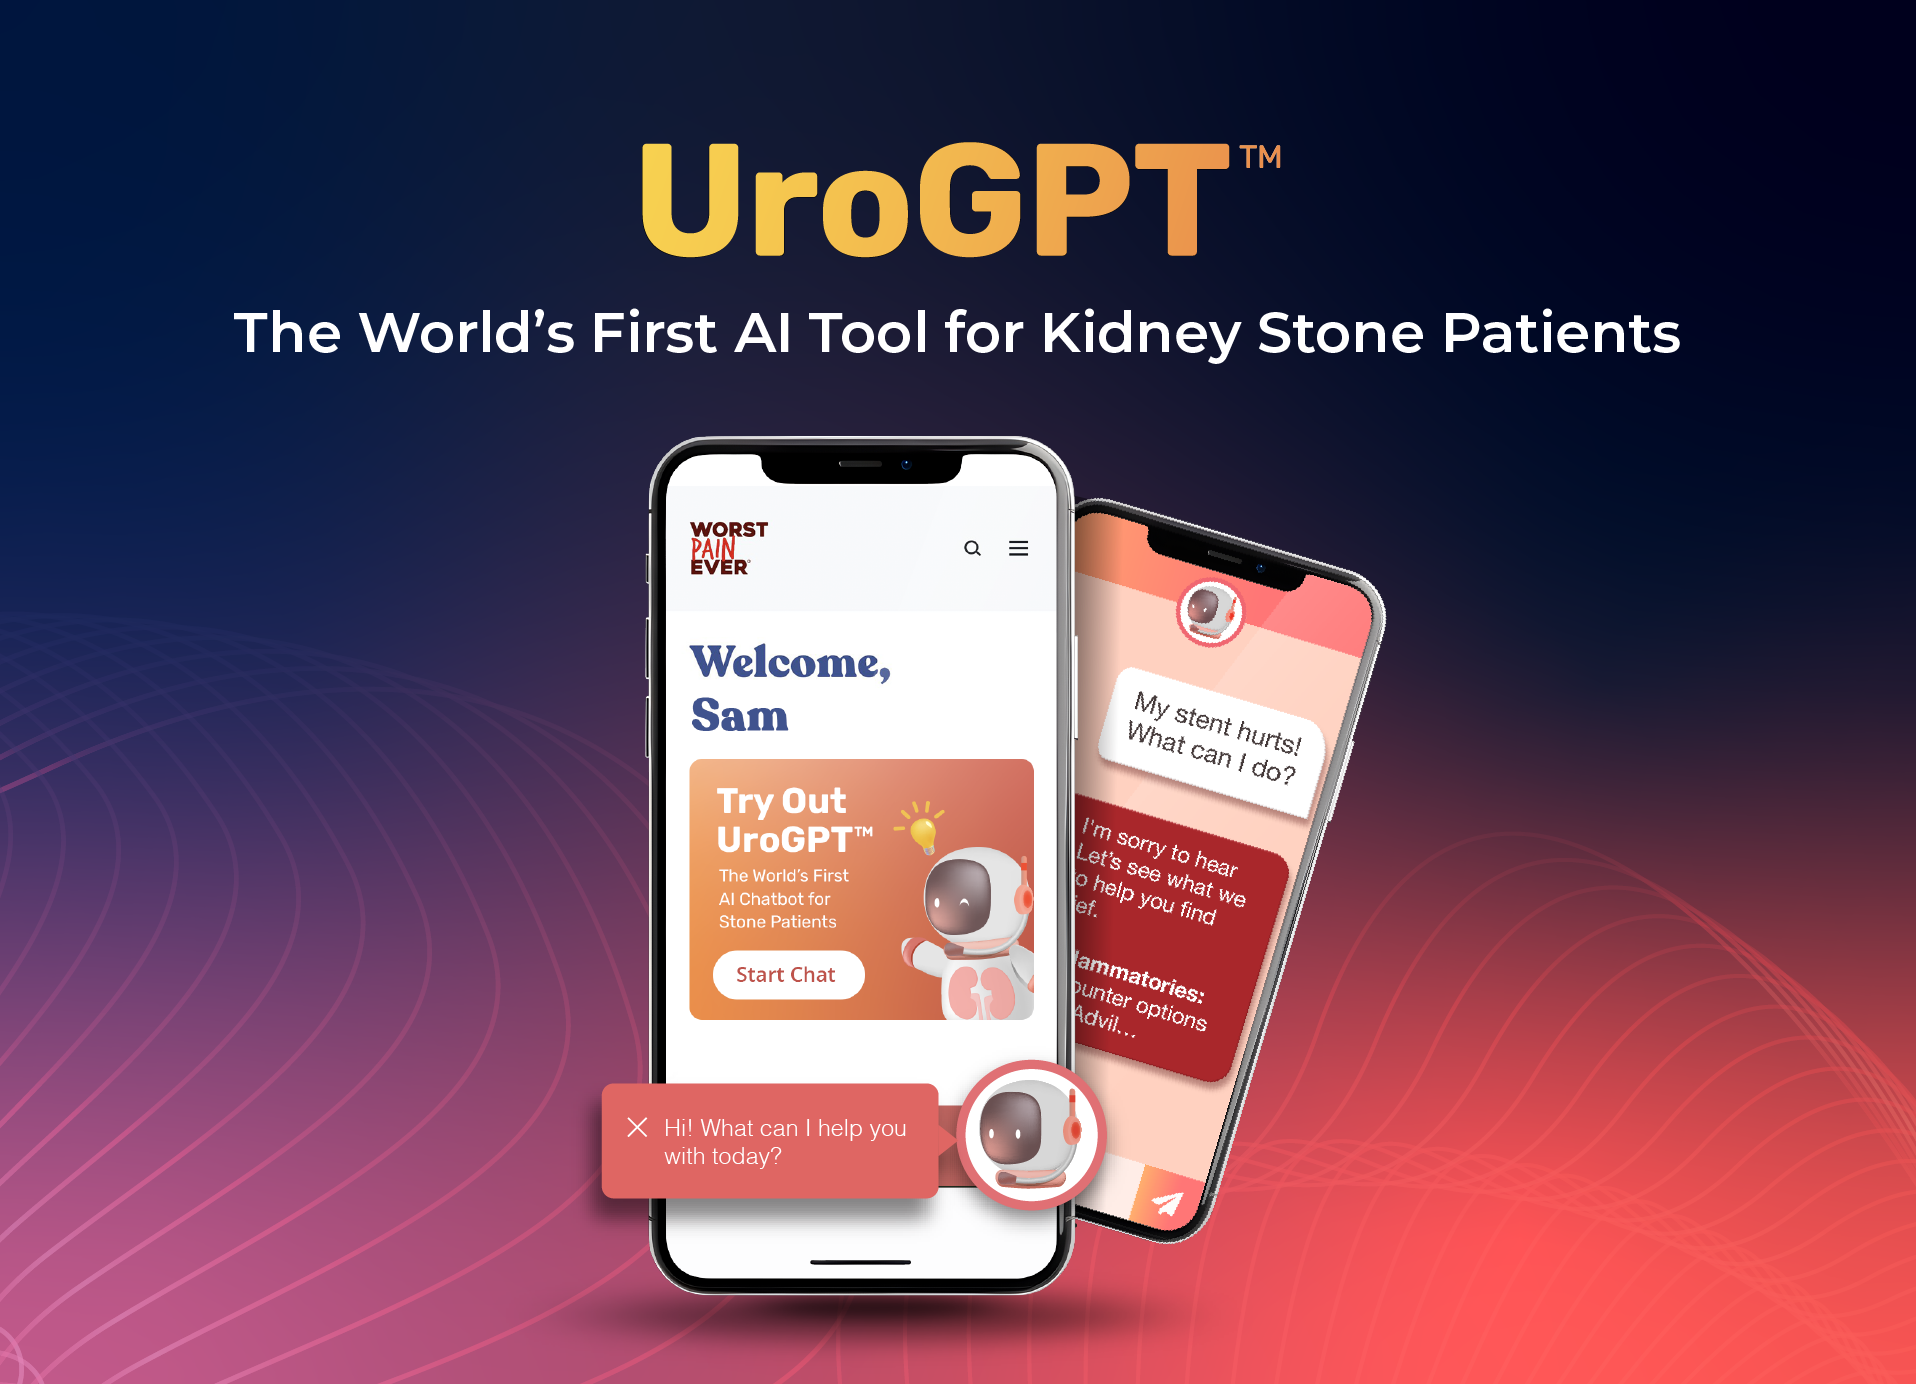 <a href='https://www.dornier.com/es/news/dornier-medtech-launches-urogpt-the-worlds-first-ai-tool-dedicated-to-kidney-stone-patients/'></noscript>Dornier MedTech Launches UroGPT™: The World’s First AI Tool Dedicated to Kidney Stone Patients</a>